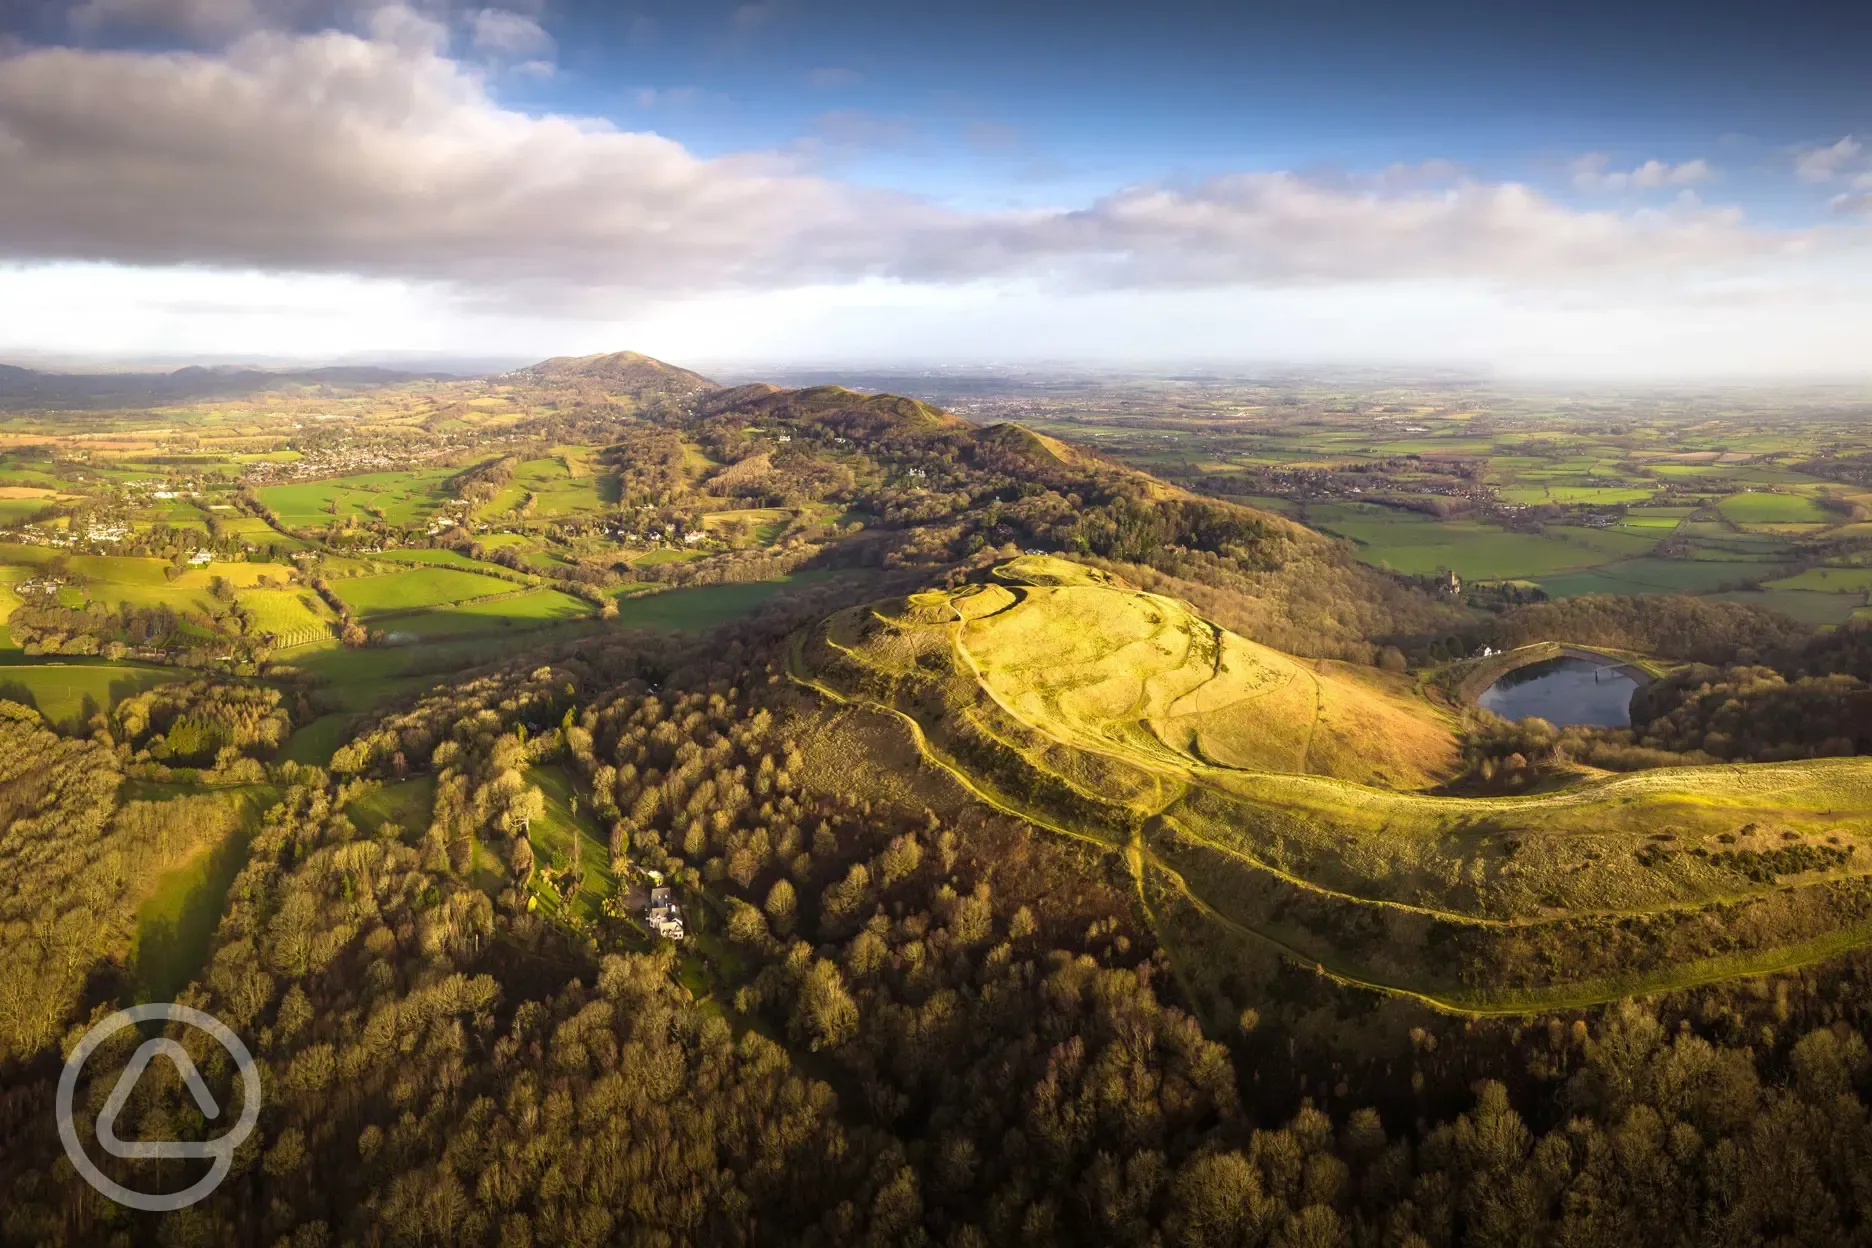 The Malvern Hills where yo will see some of England's finest countryside